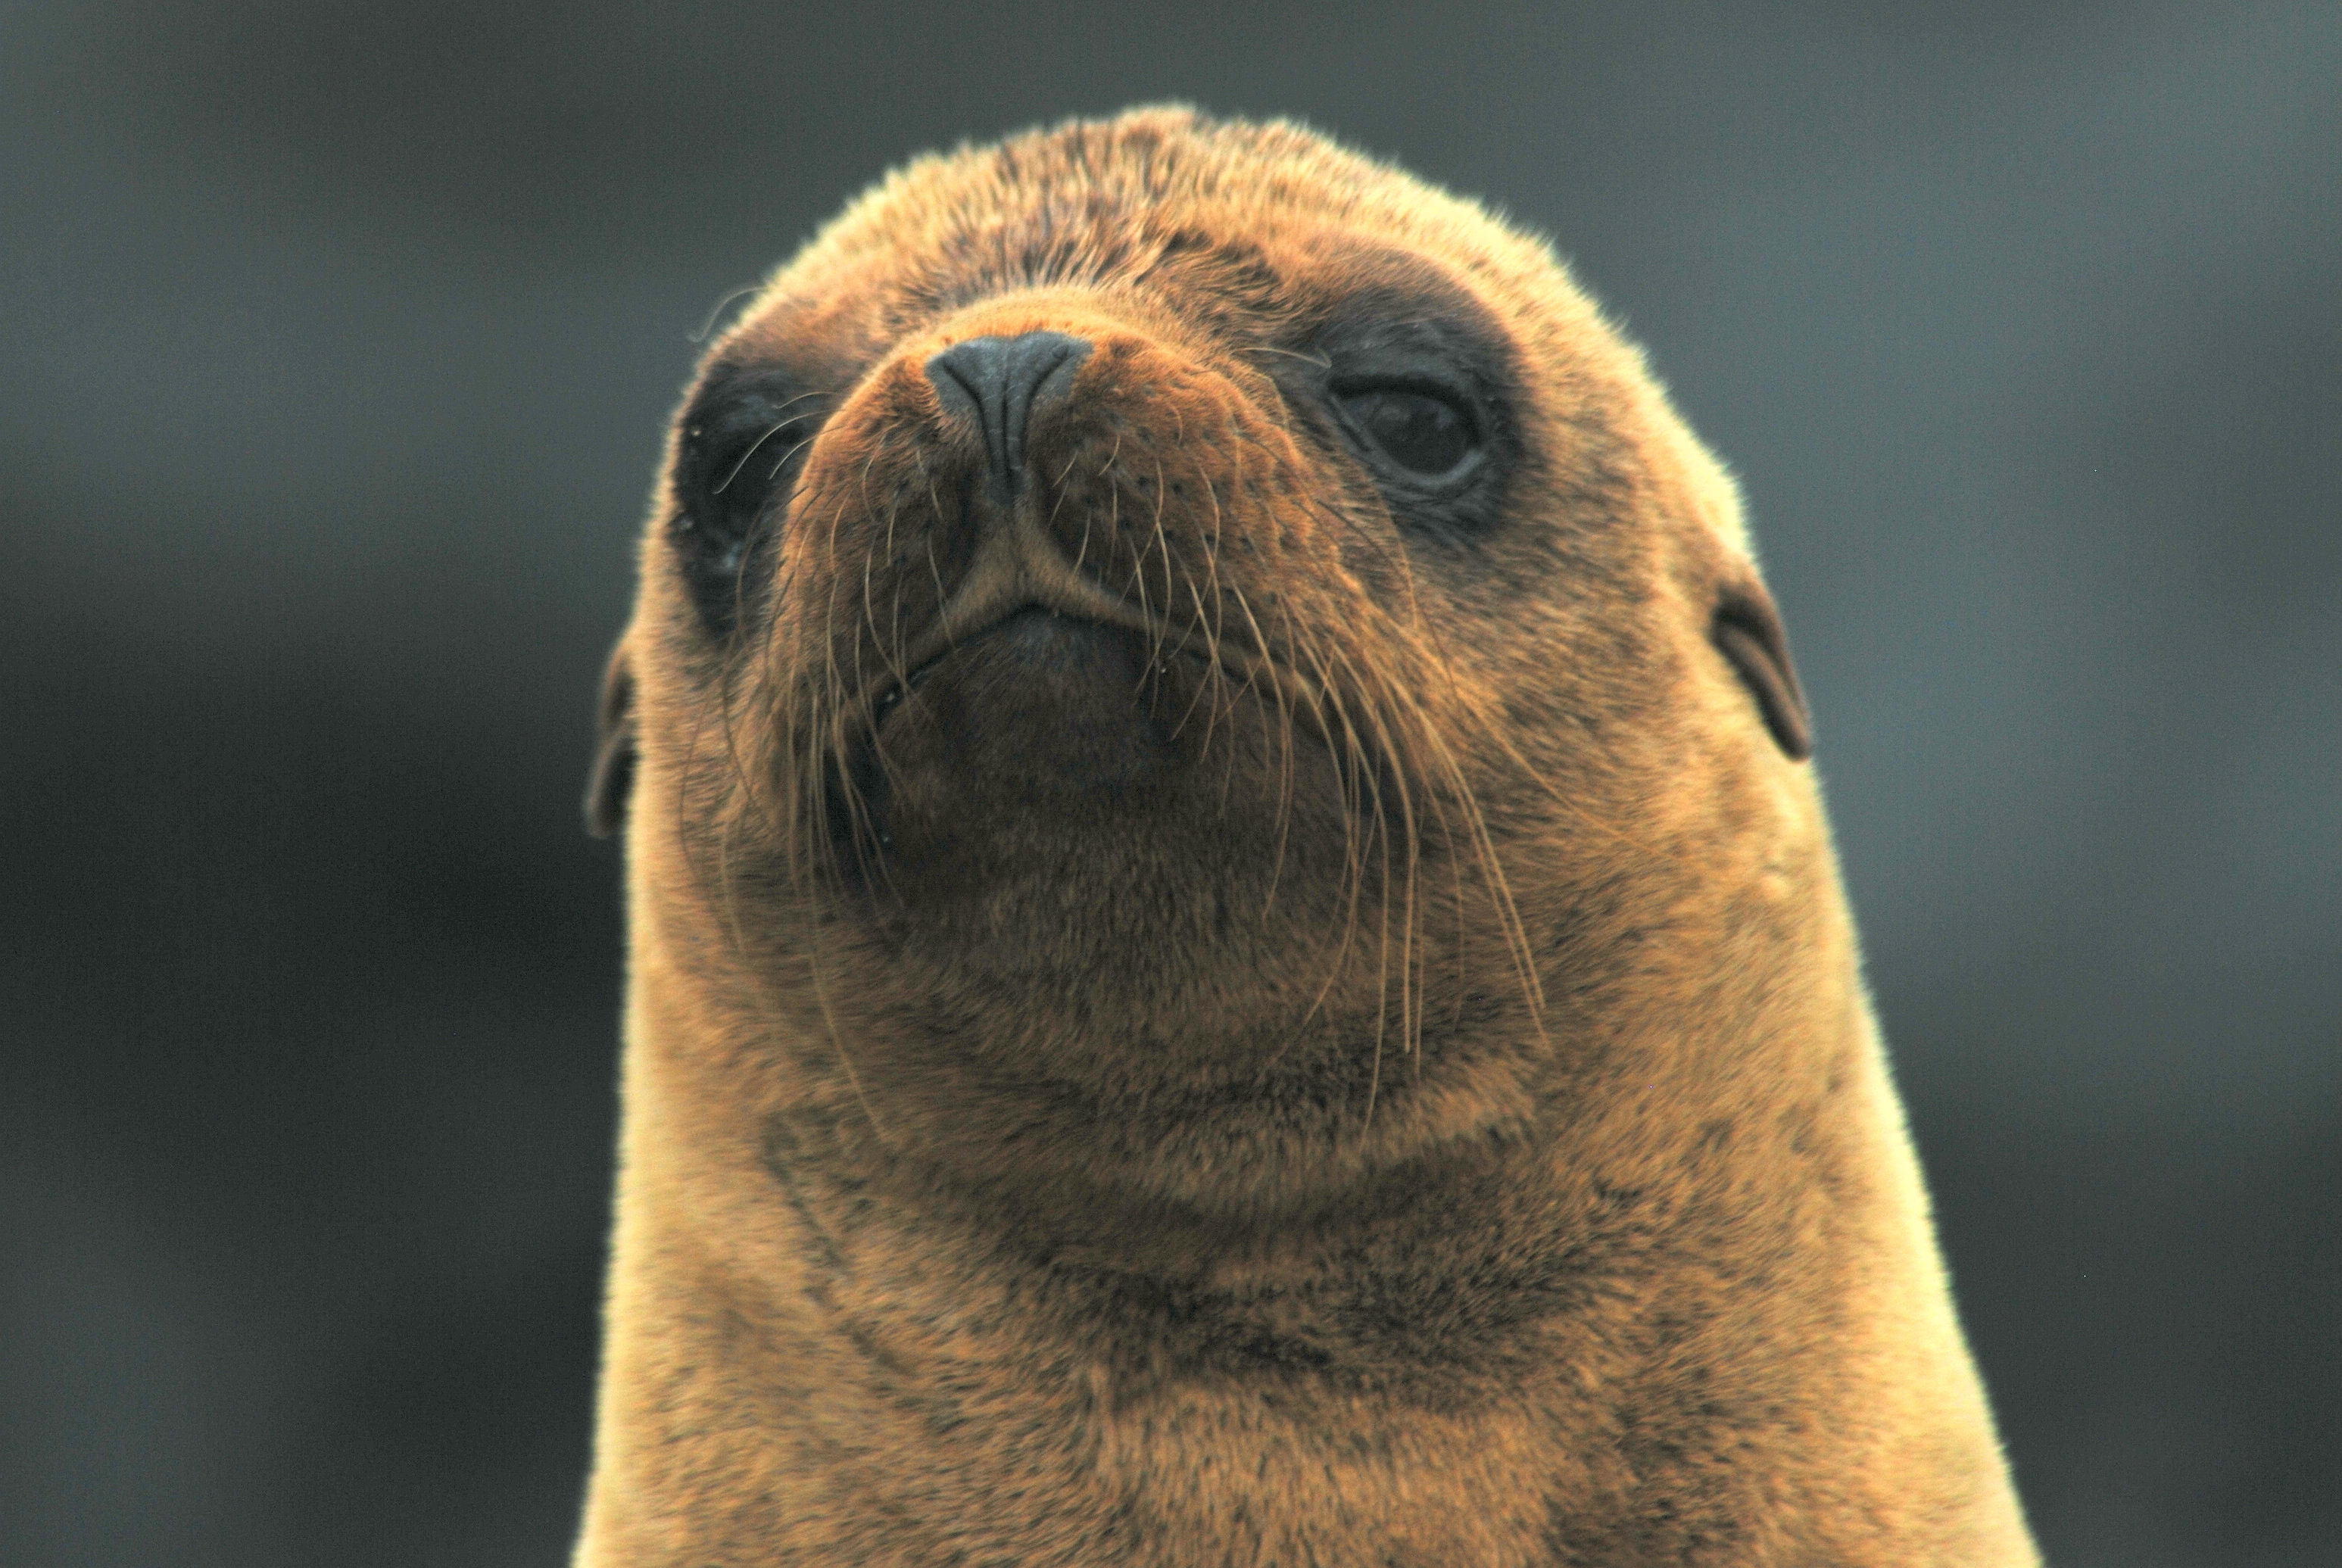 Click picture to see more Galpagos Fur Seals.